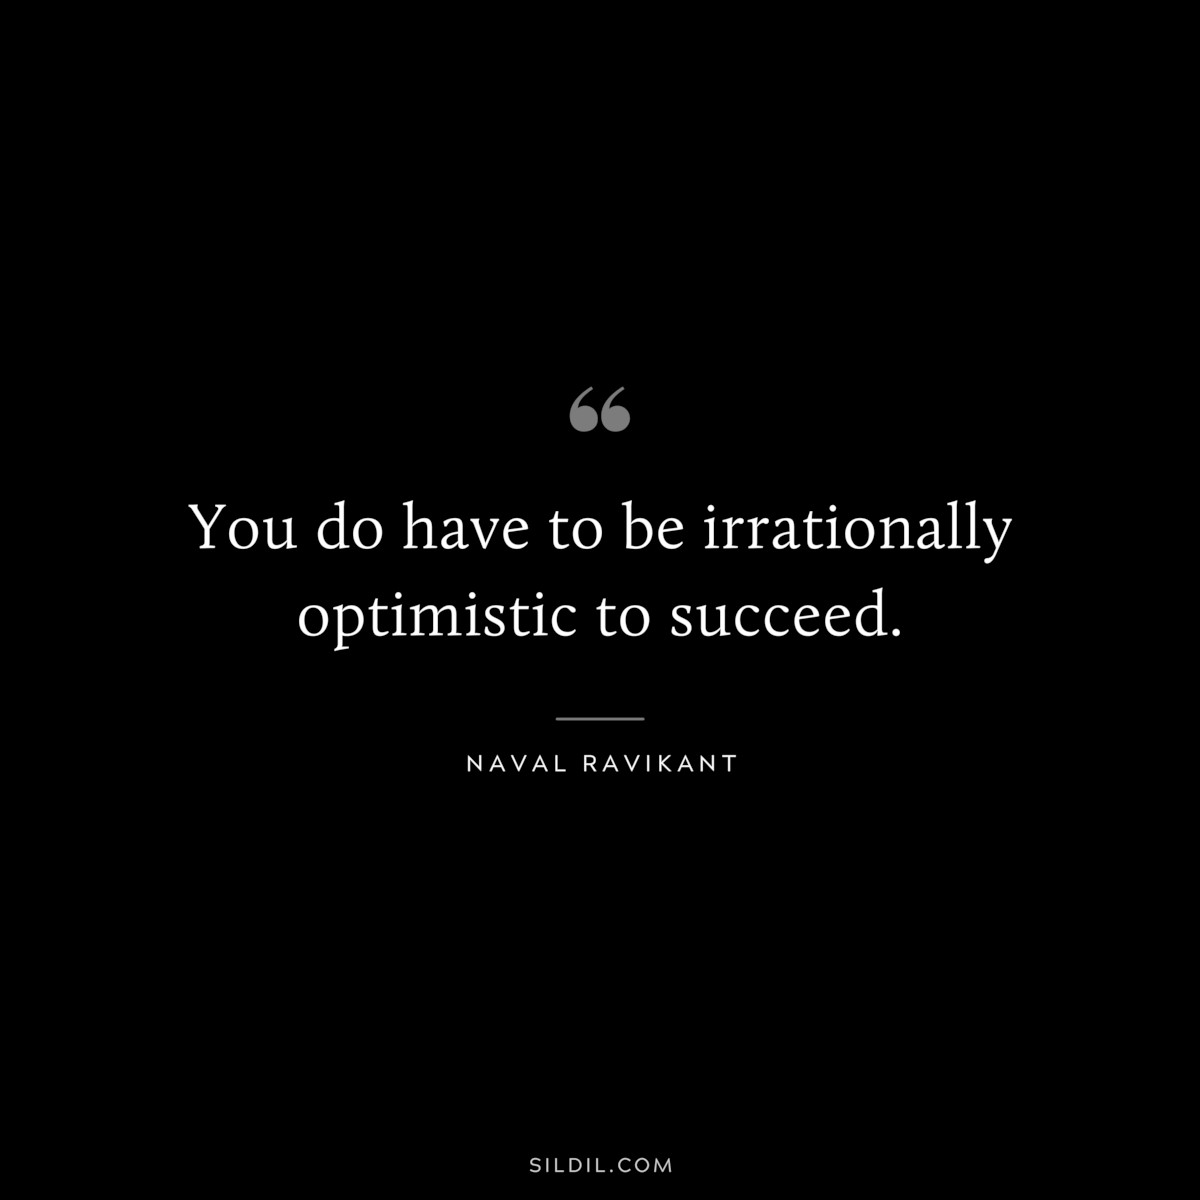 You do have to be irrationally optimistic to succeed. ― Naval Ravikant